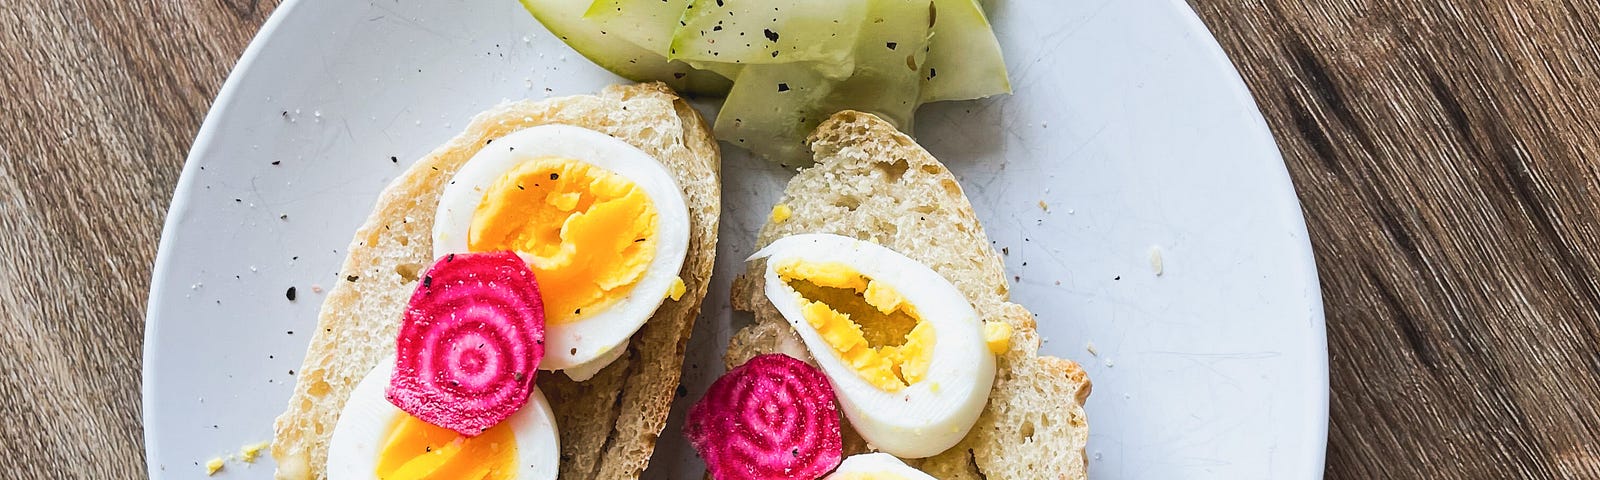 Two slices of homemade bread topped with eggs and garden-fresh beets.